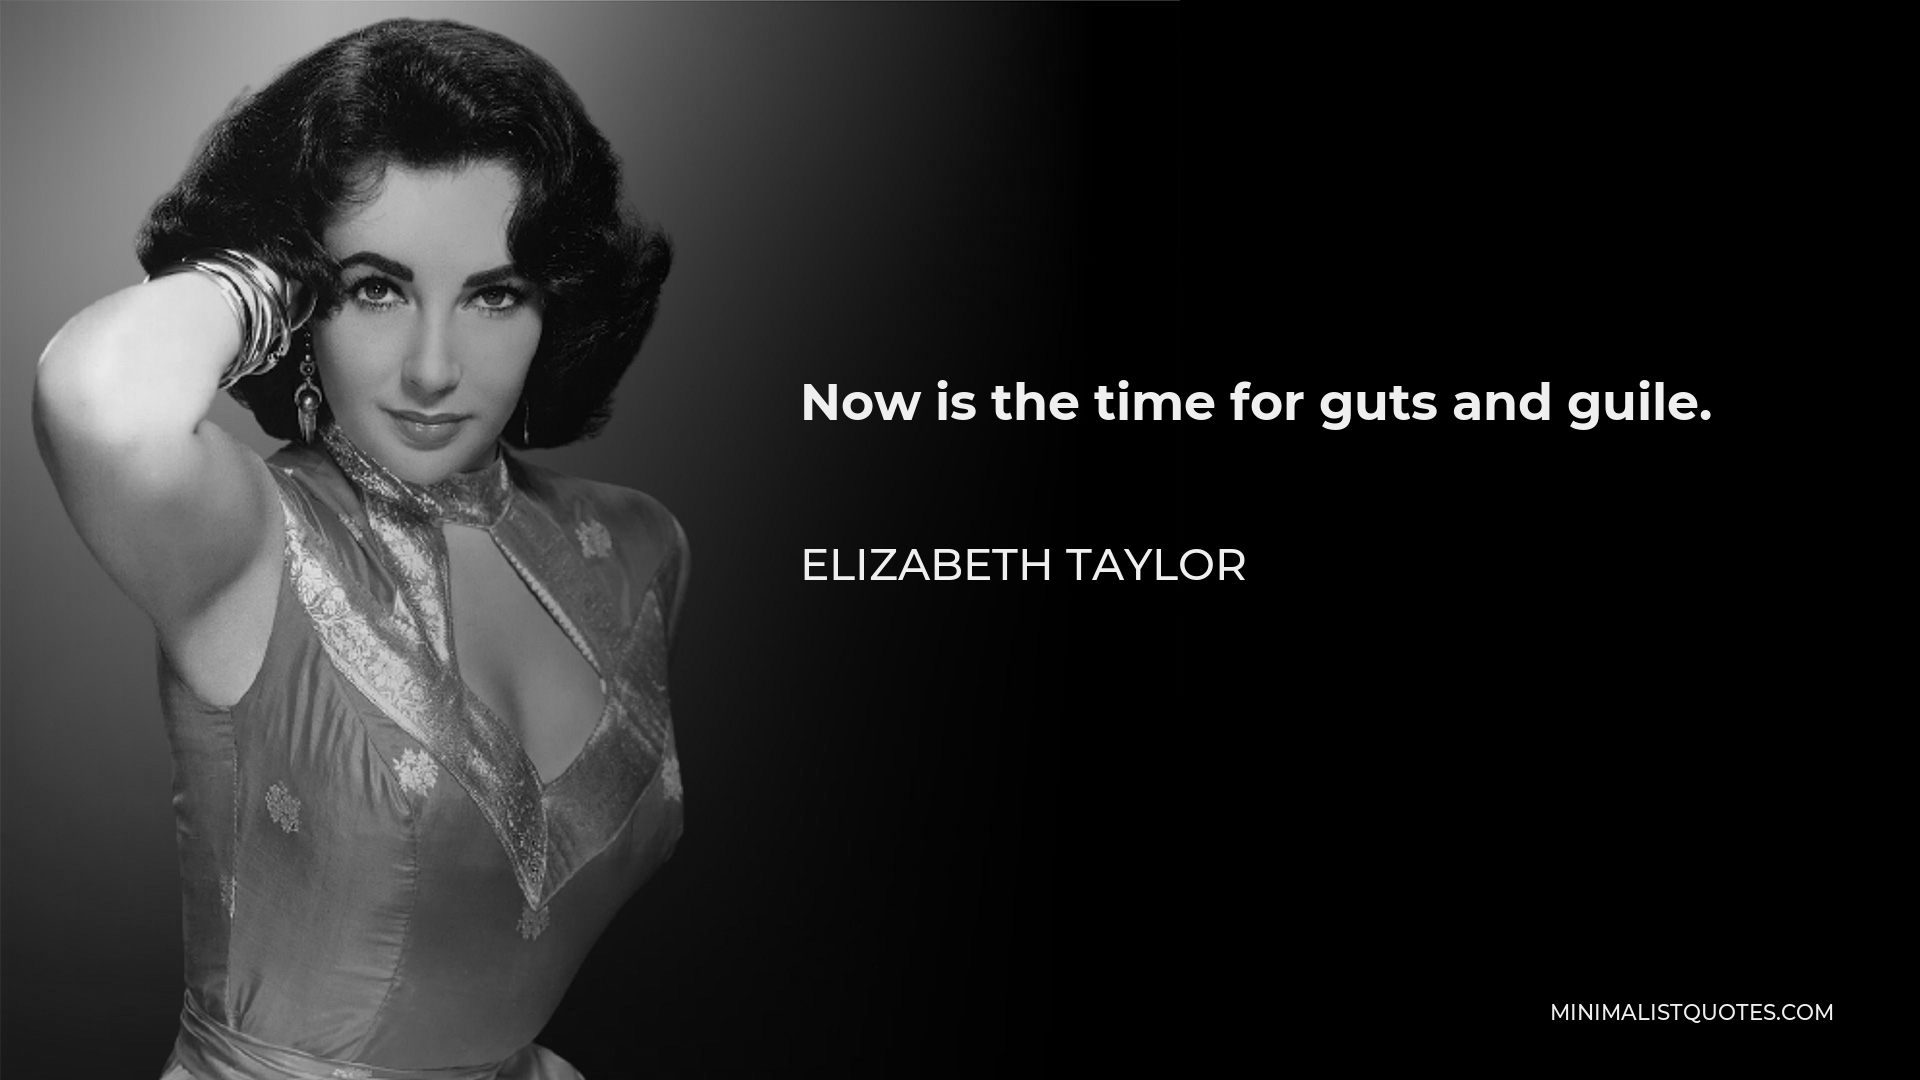 Elizabeth Taylor Quote - Now is the time for guts and guile.